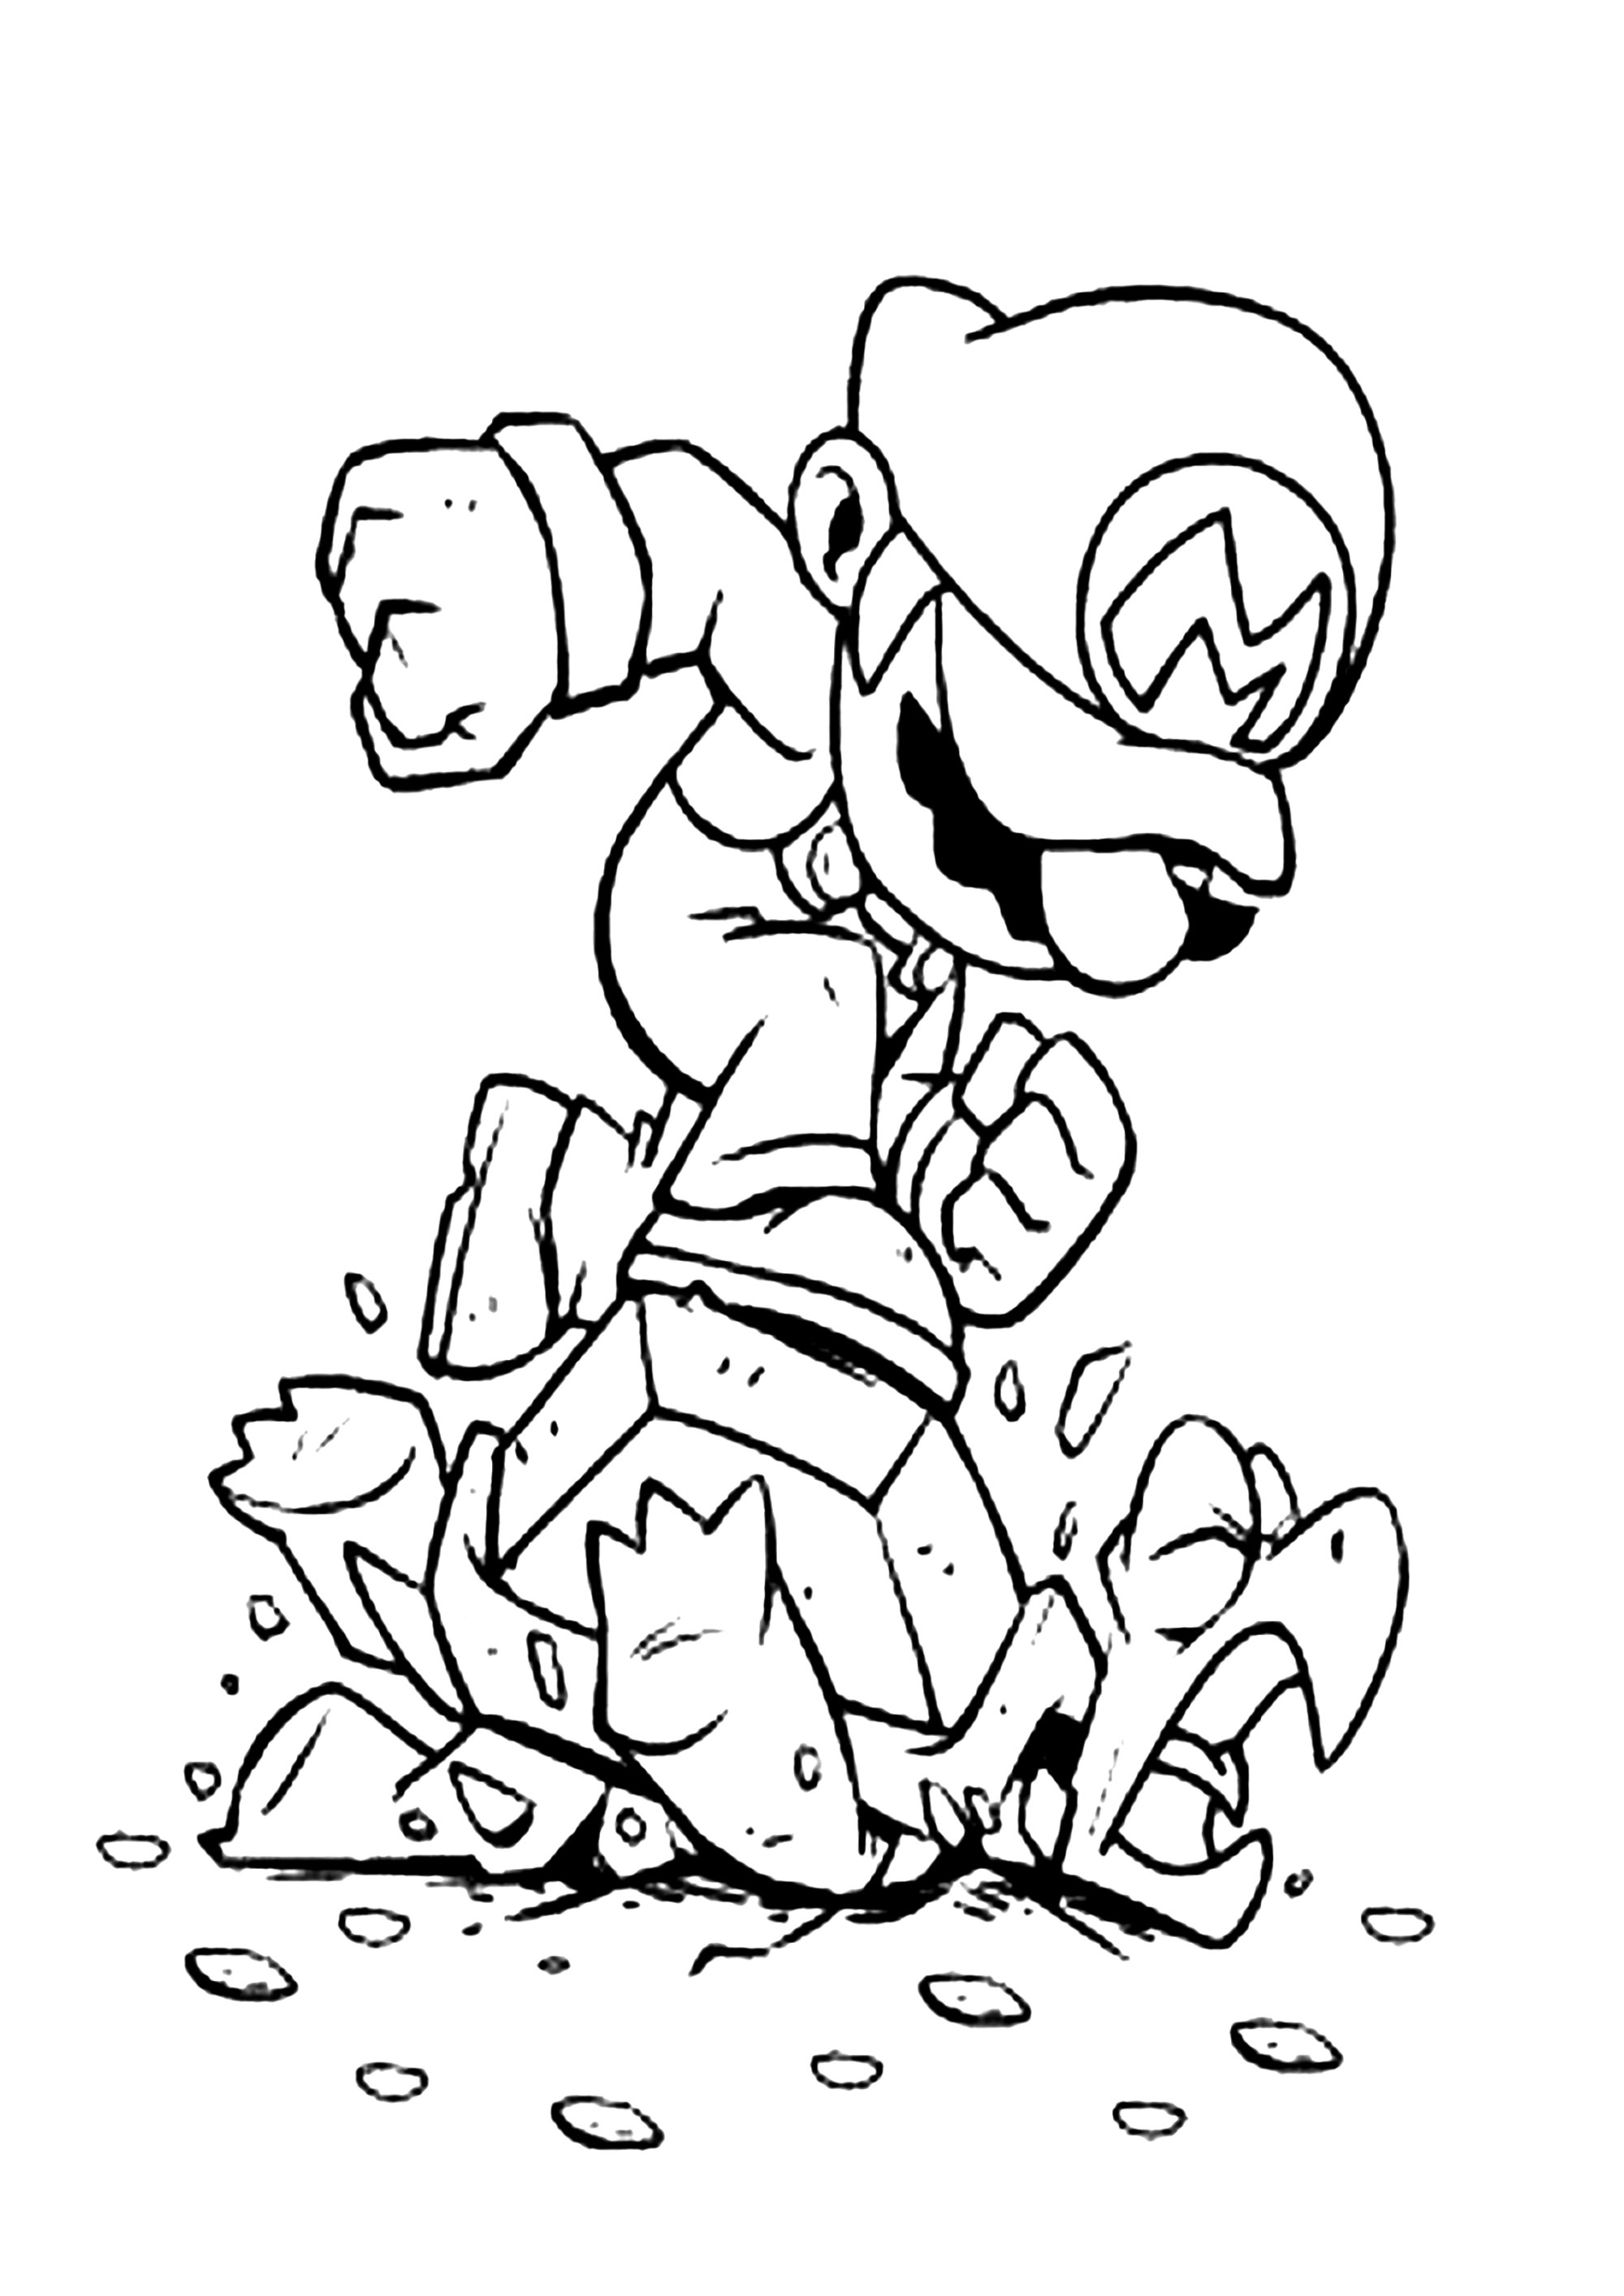 Simple free Mario Bros coloring page to print and color